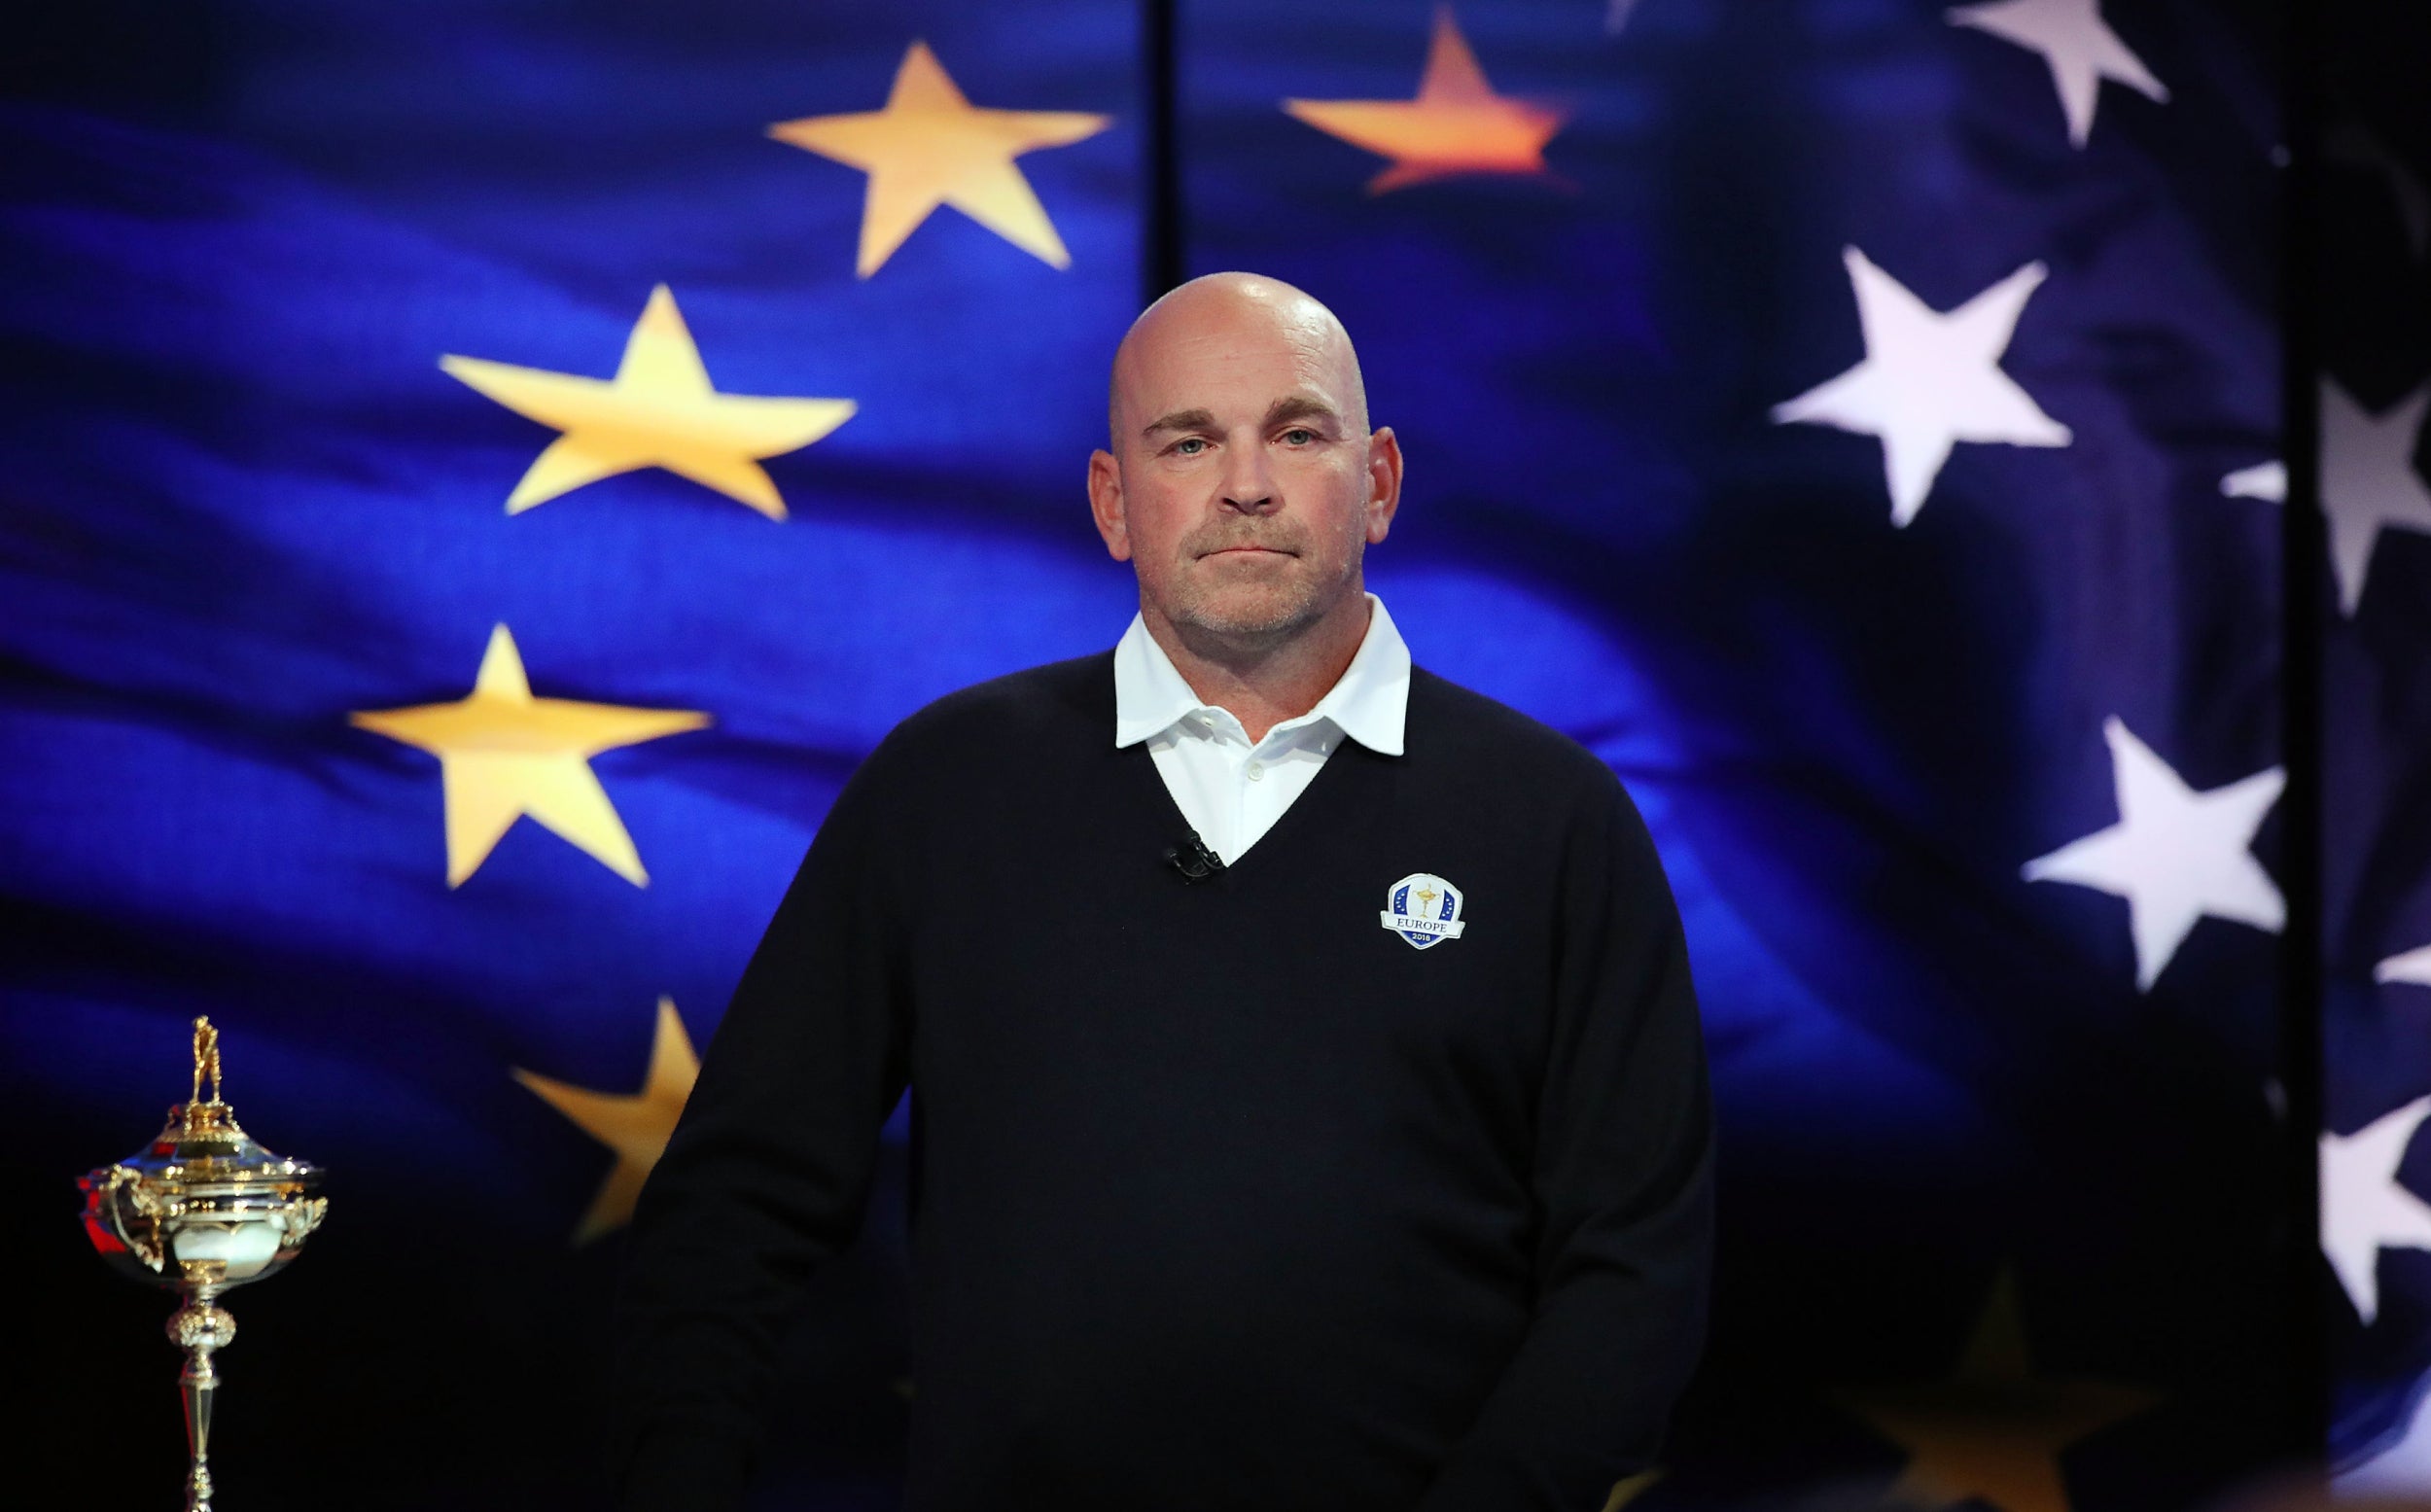 Thomas Bjorn has been tasked with bringing the Ryder Cup back to Europe